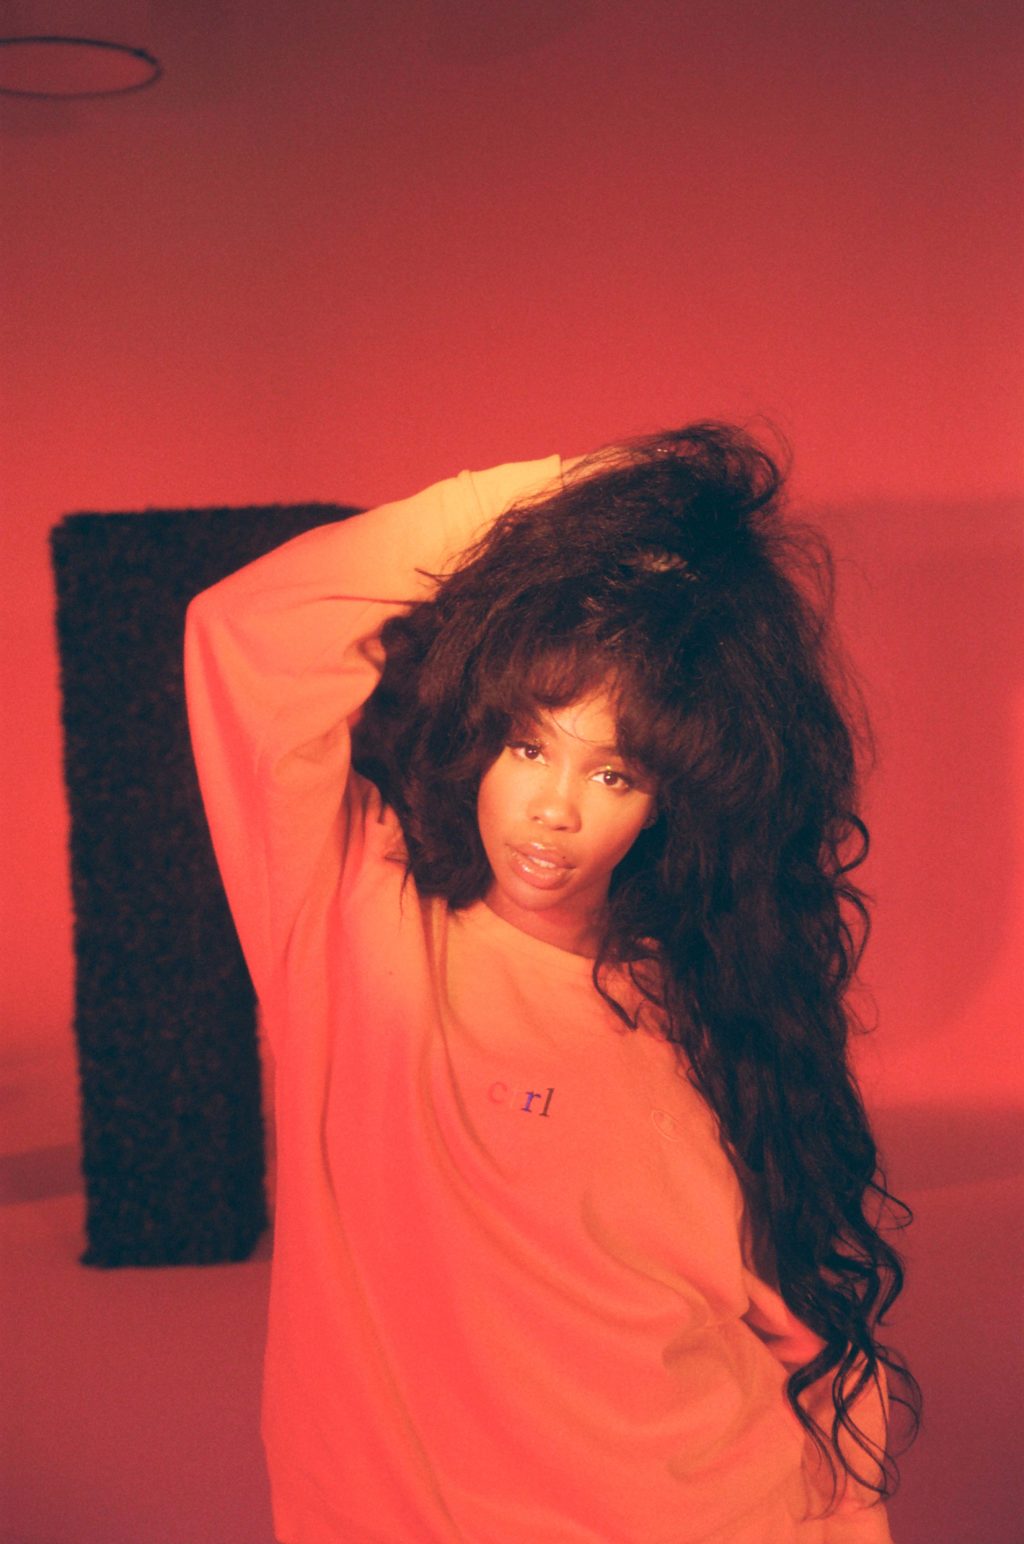 sza gets personal with ctrl tour